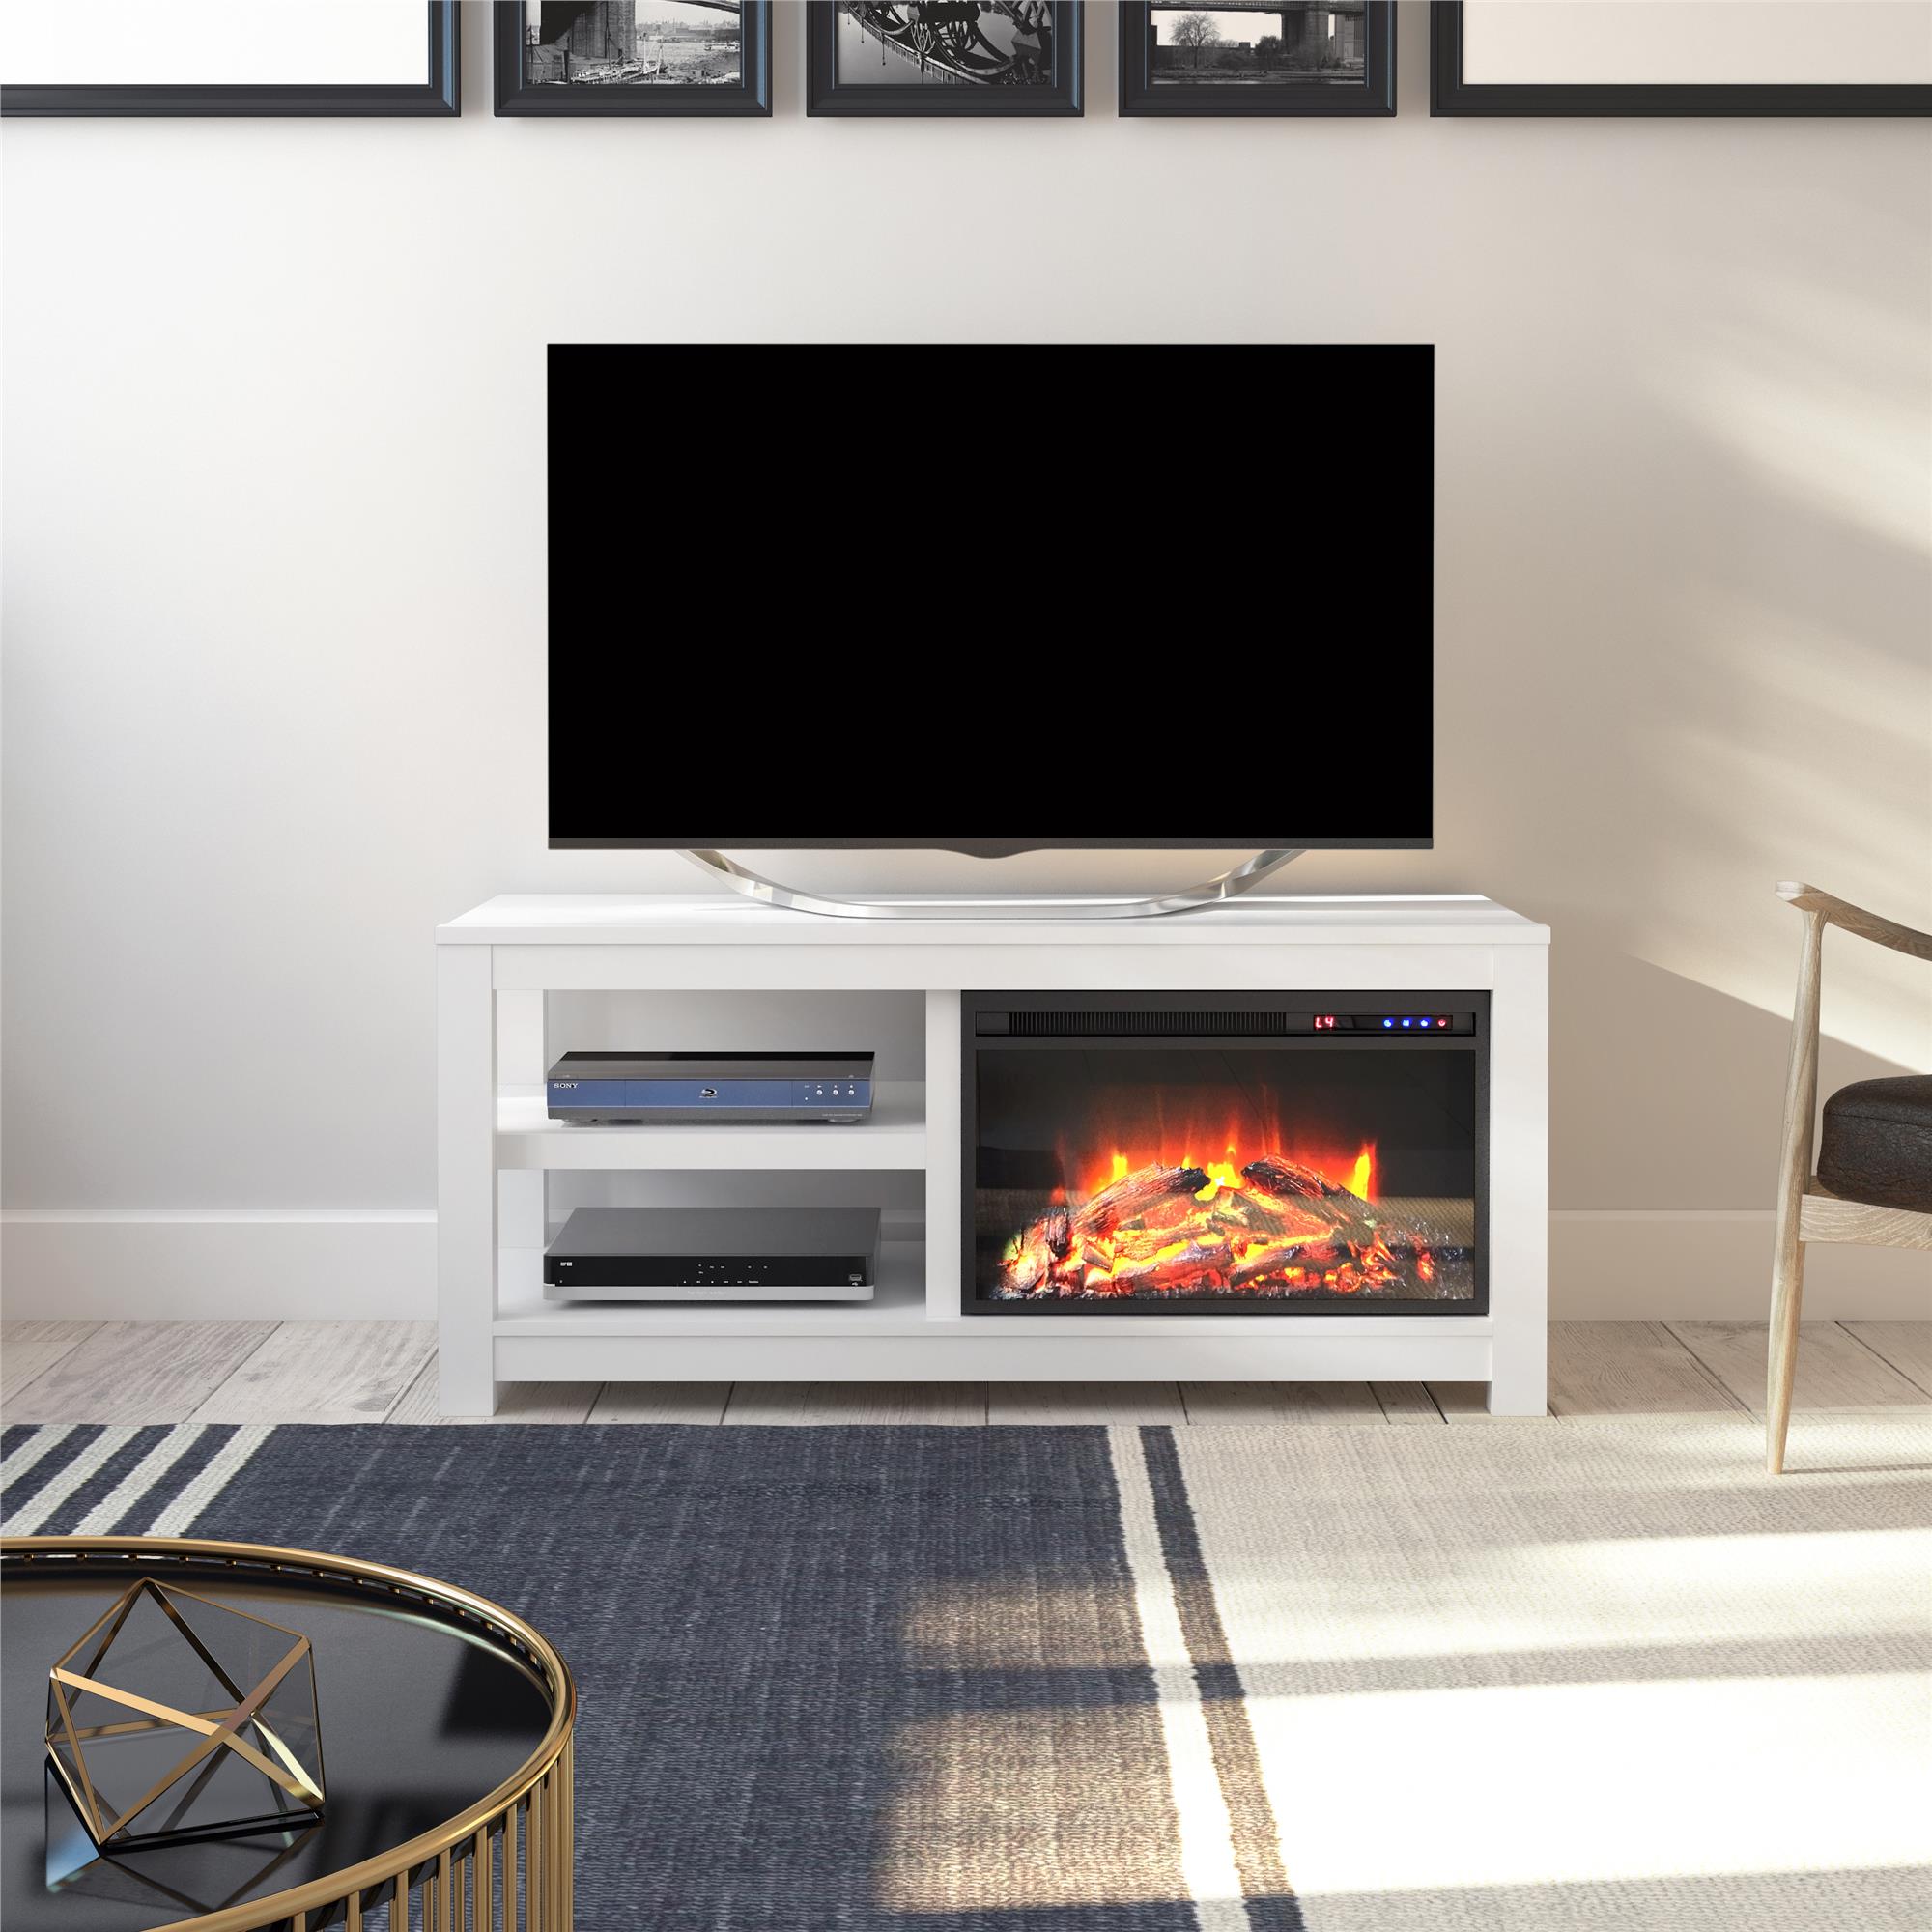 Ameriwood Home Glyndon Electric Fireplace TV Stand for TVs up to 55" White - image 2 of 7